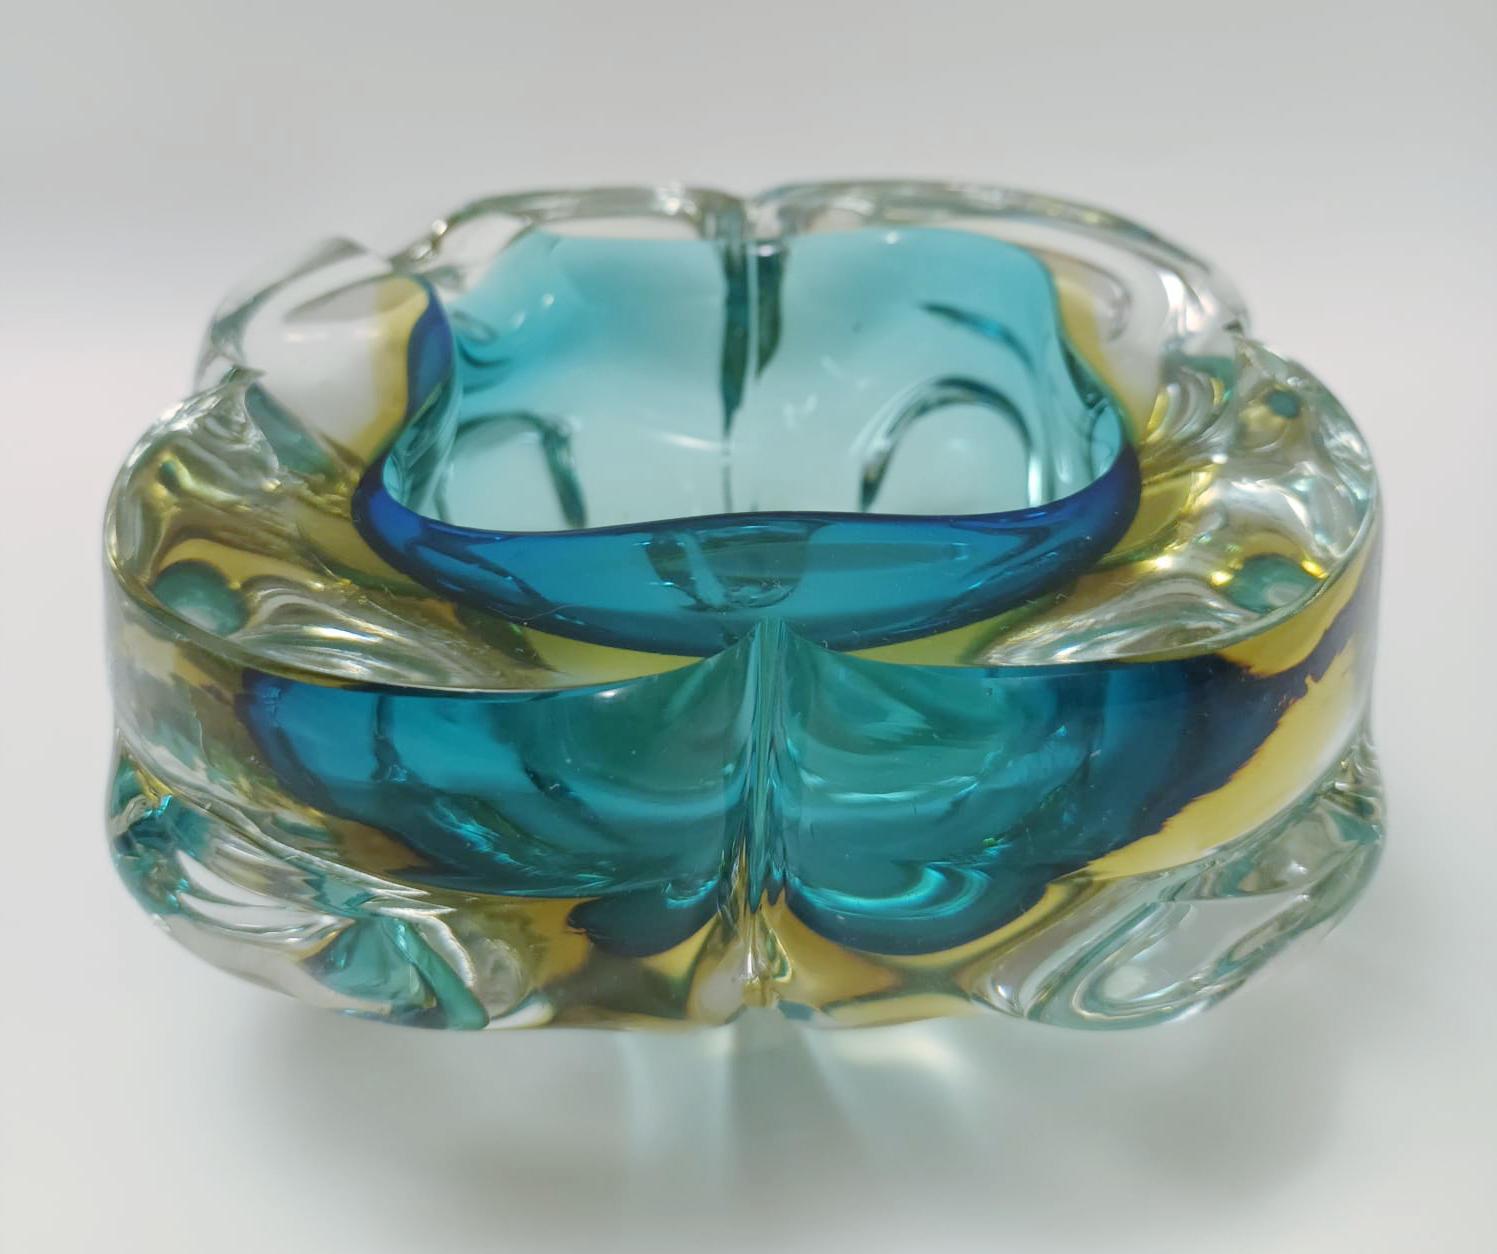 Vintage Italian blue and yellow Murano glass ashtray or bowl / Made in Italy, circa 1960s
Measures: diameter 5.5 inches, height 2.5 inches
1 in stock in Italy on 50% OFF SALE for $449 !
This piece makes for great and unique gift!
  